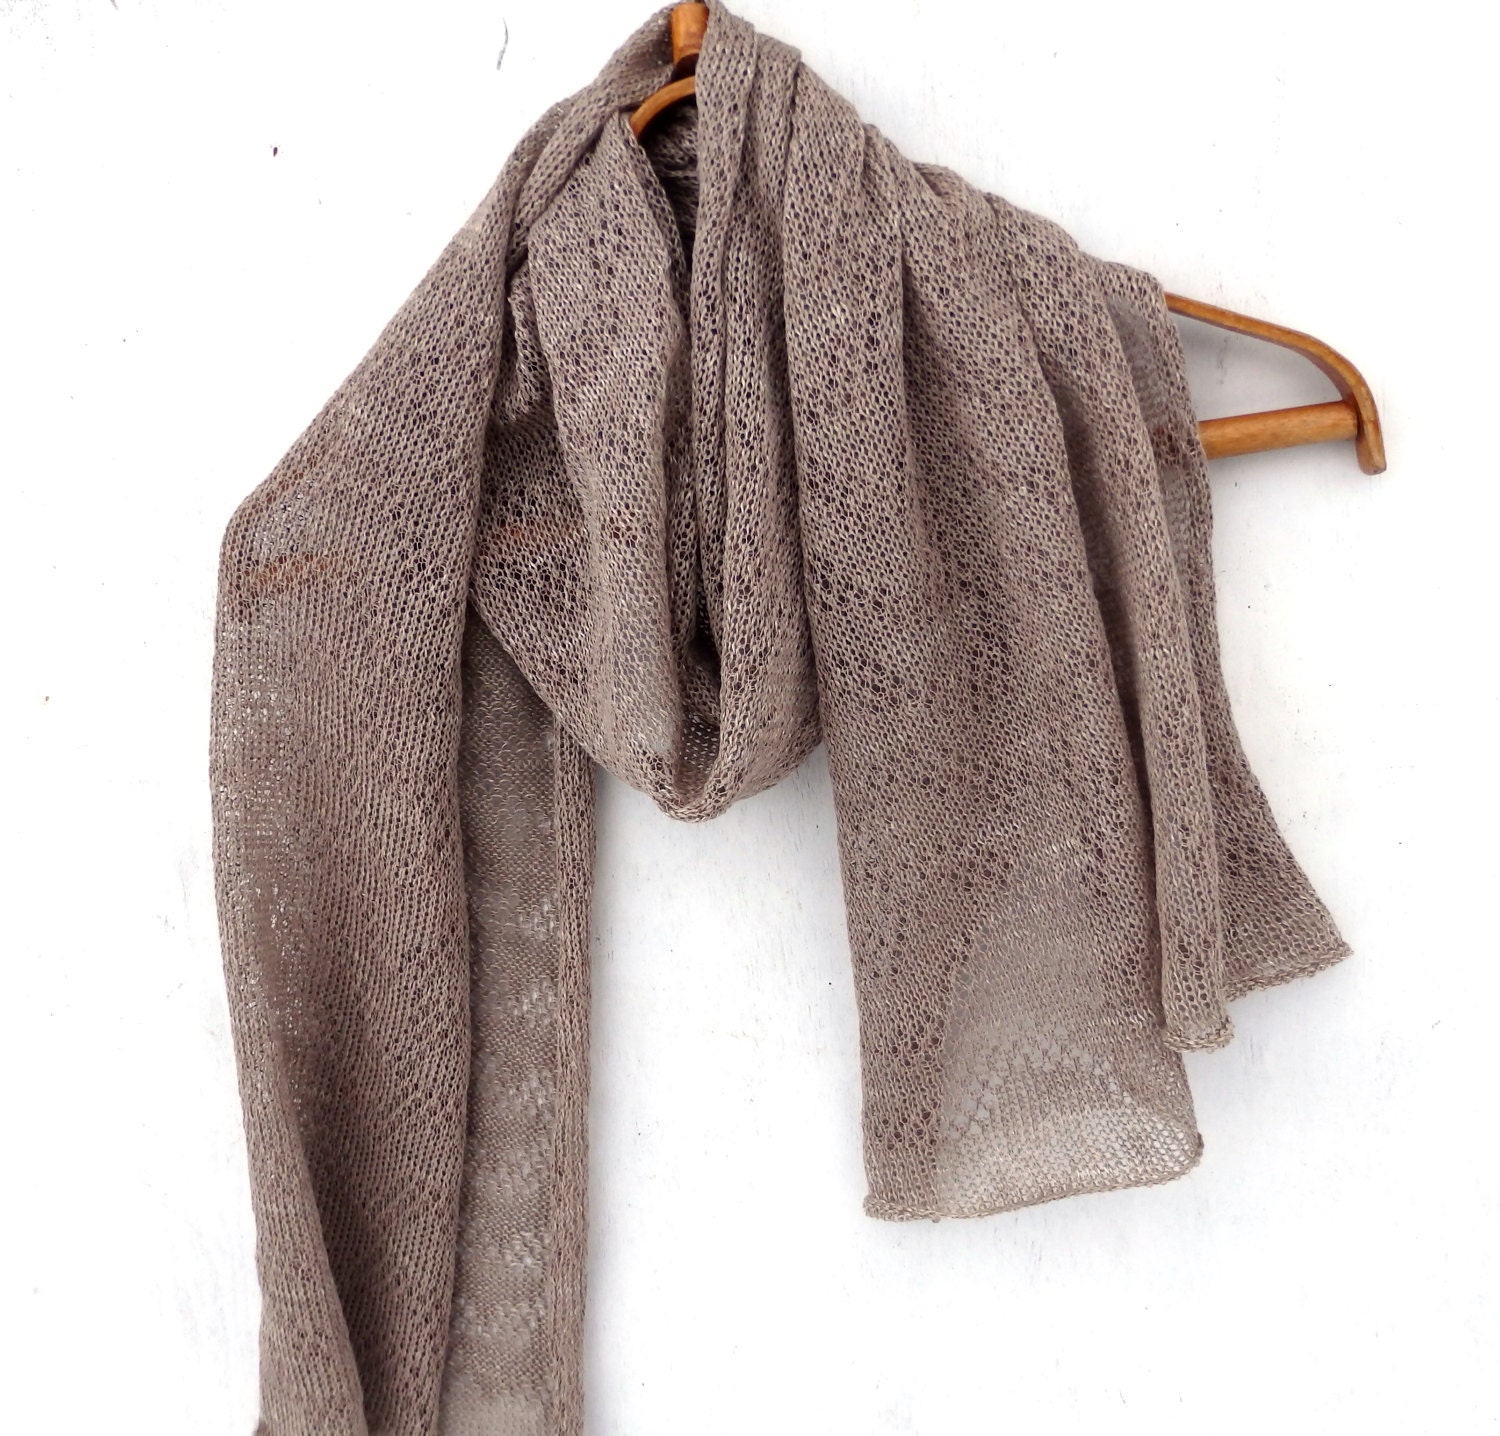 knitted linen scarf knit wrap knitting flax shawl stola